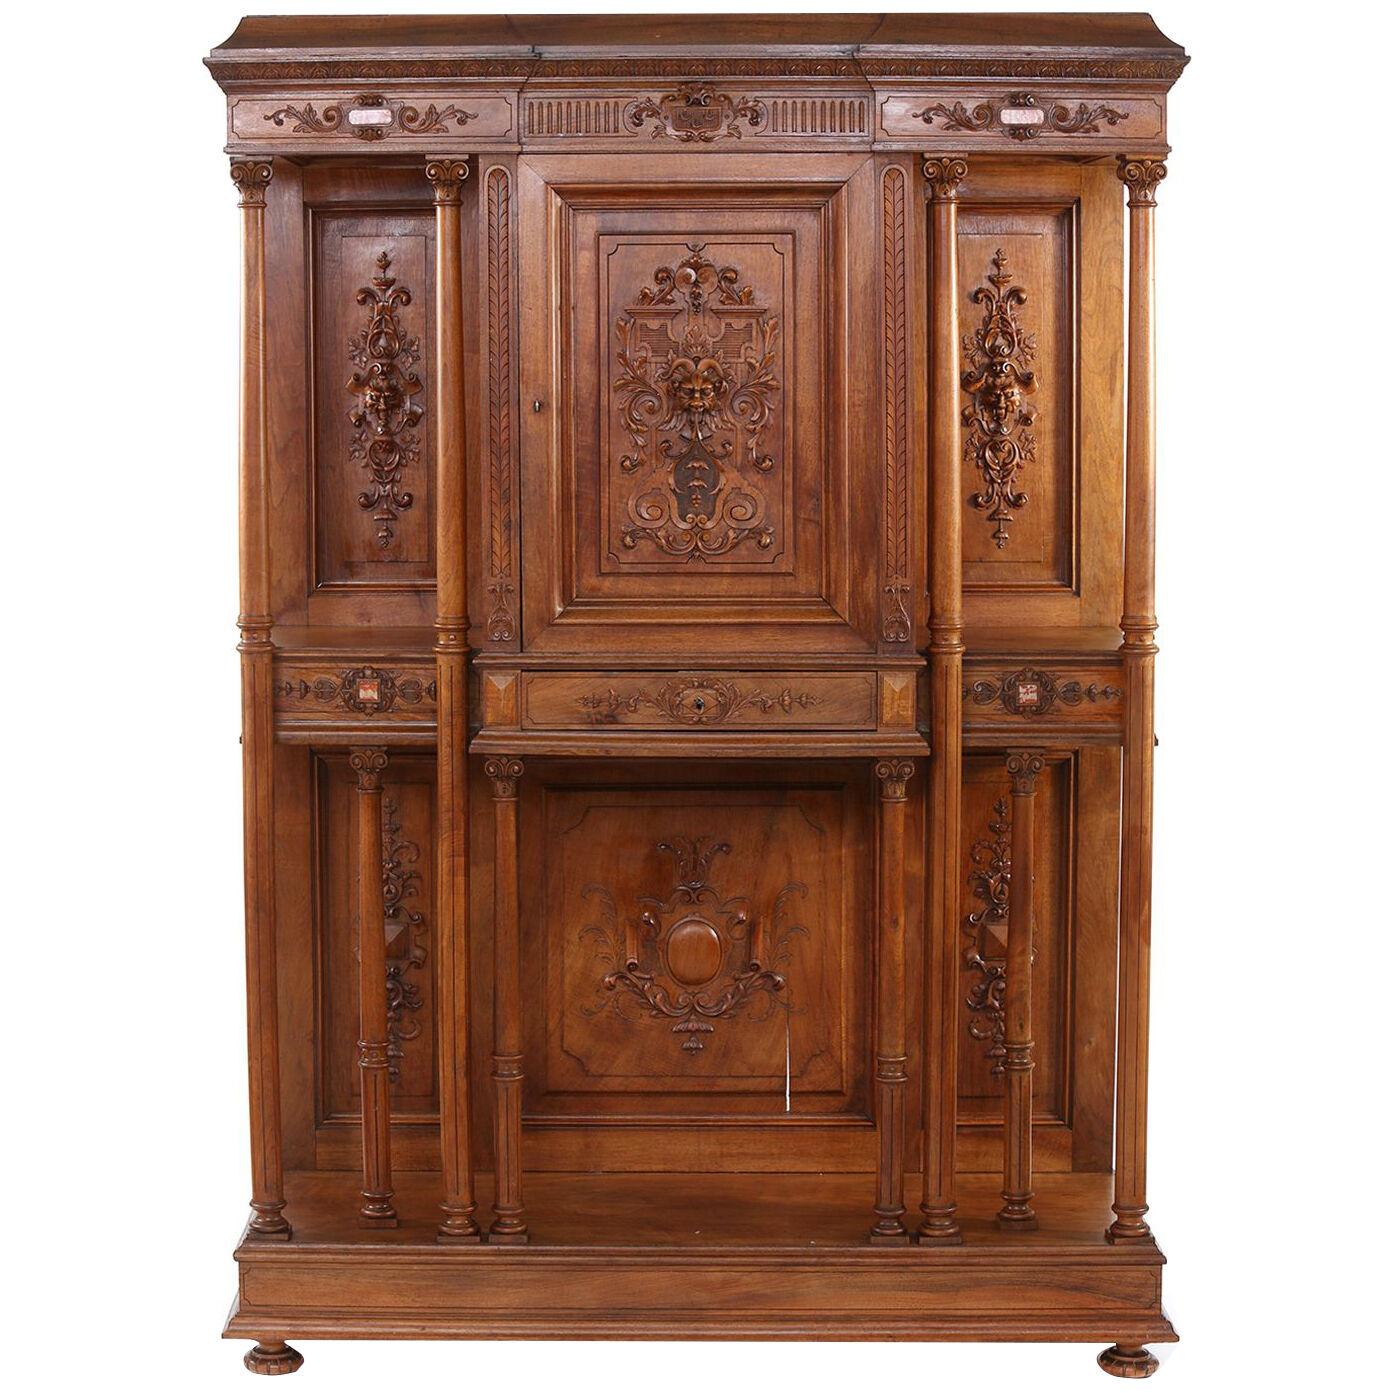 19th Century French Renaissance Revival Display Cabinet